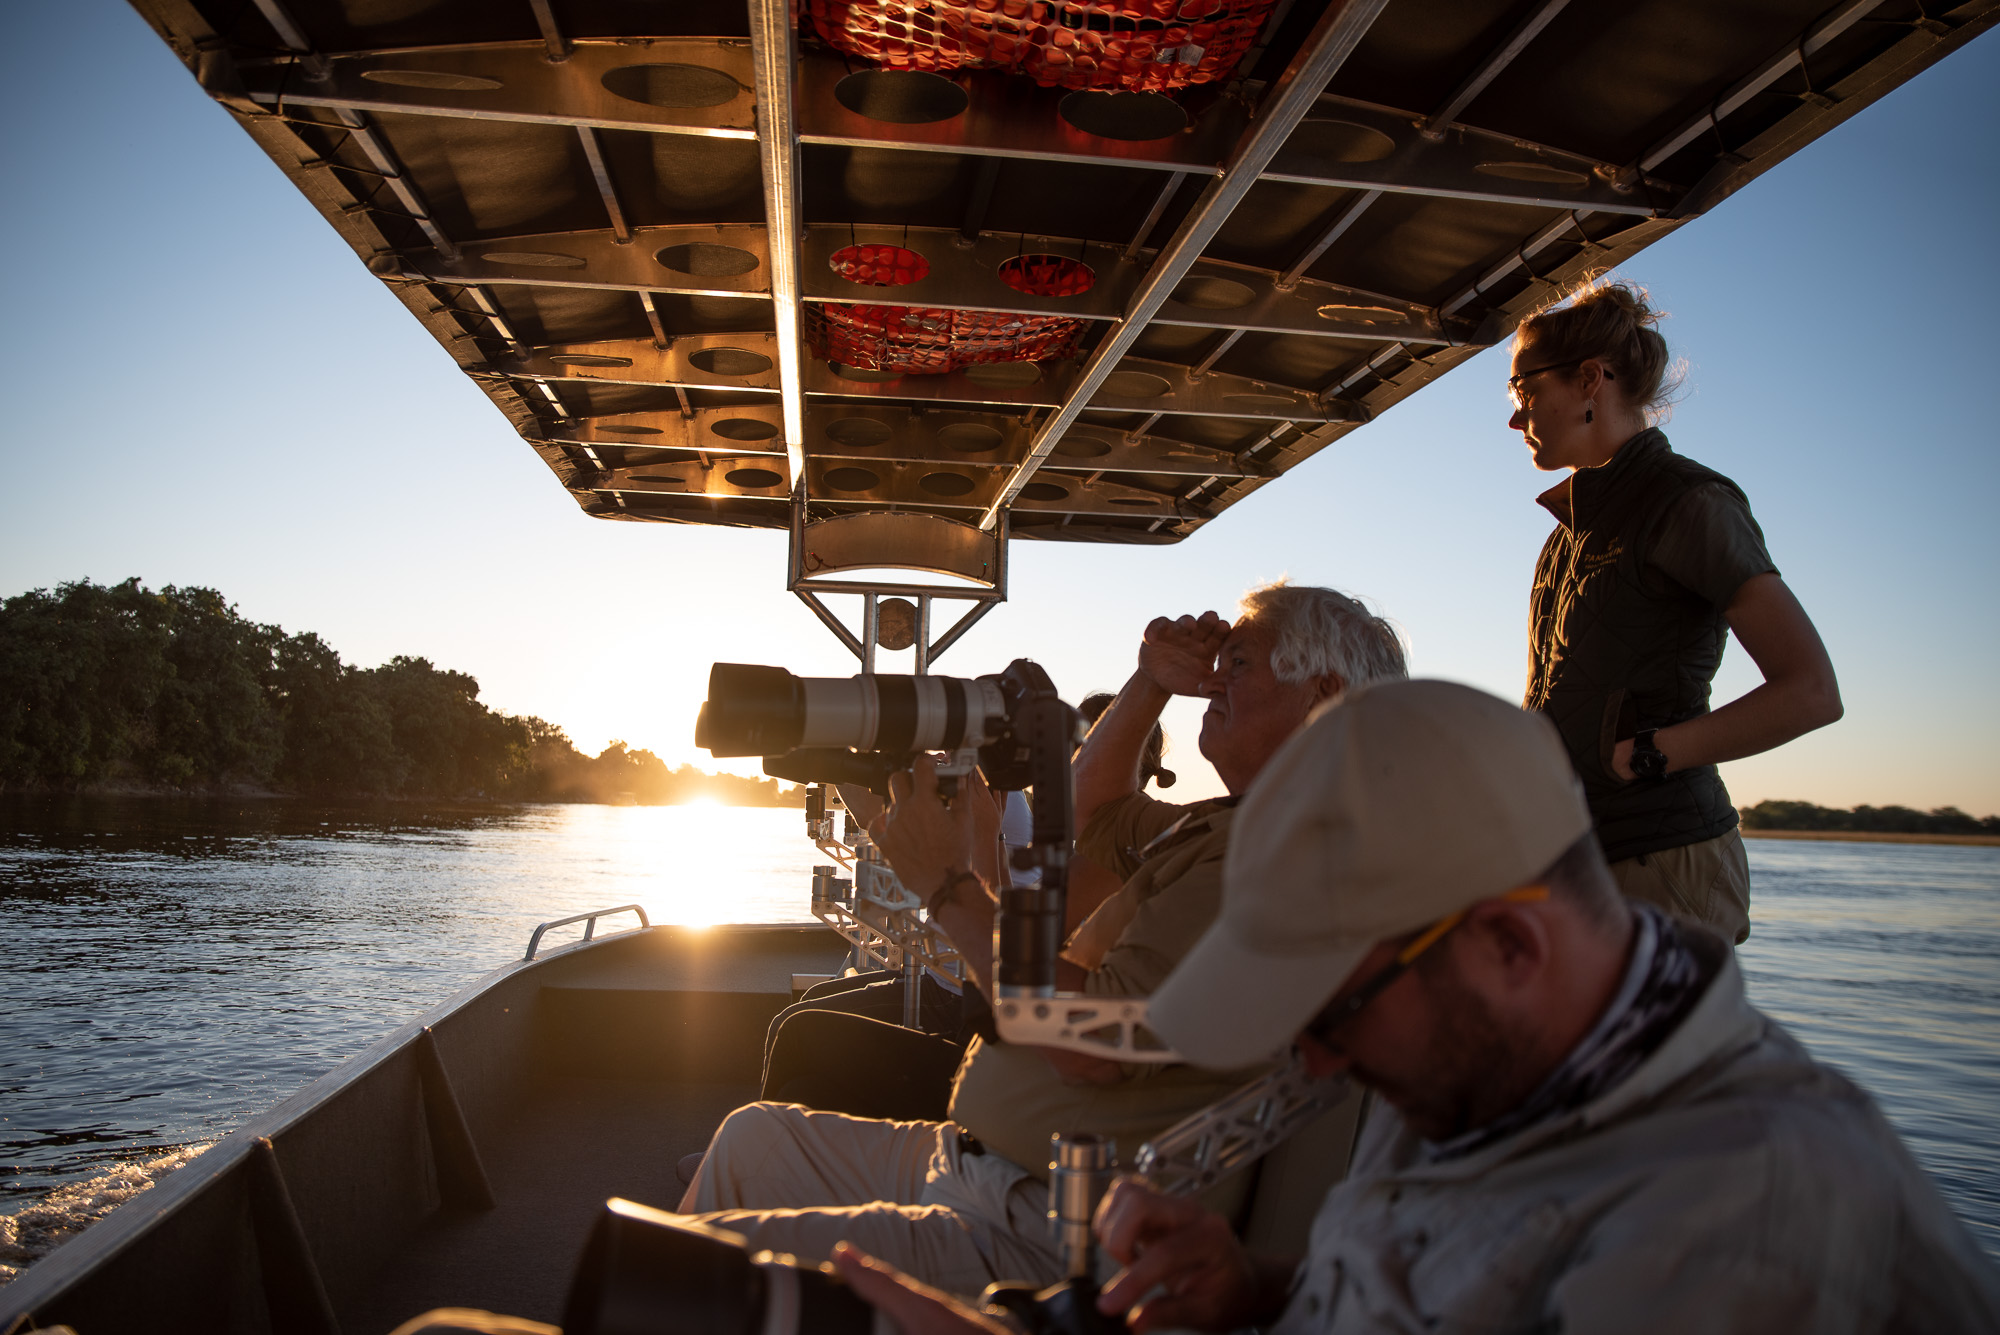 Photography from a special shooting boat along the Chobe River in Botswana